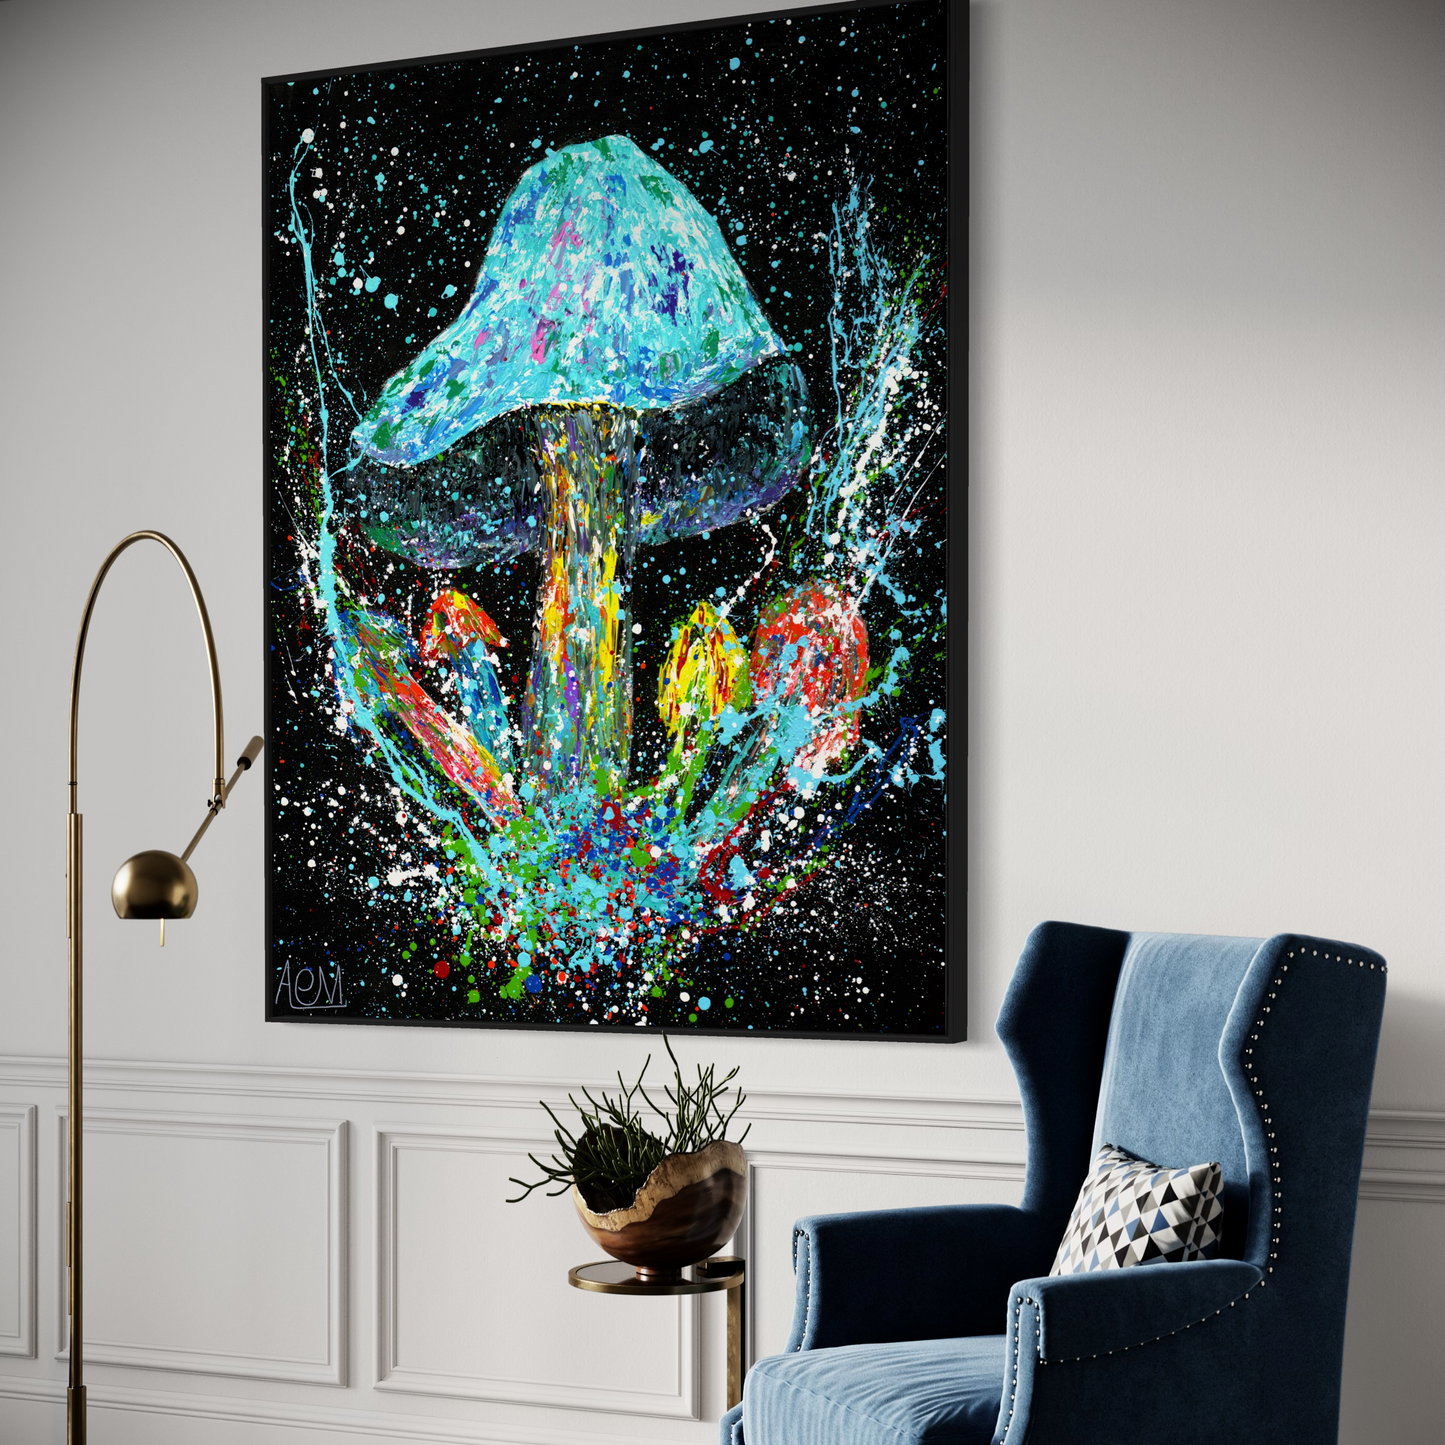 Elegant interior with a large, vibrant abstract painting of a cosmic mushroom, set in a luxurious room with classic white wainscoting, beside a navy blue wingback chair with a geometric cushion, and a chic brass floor lamp.